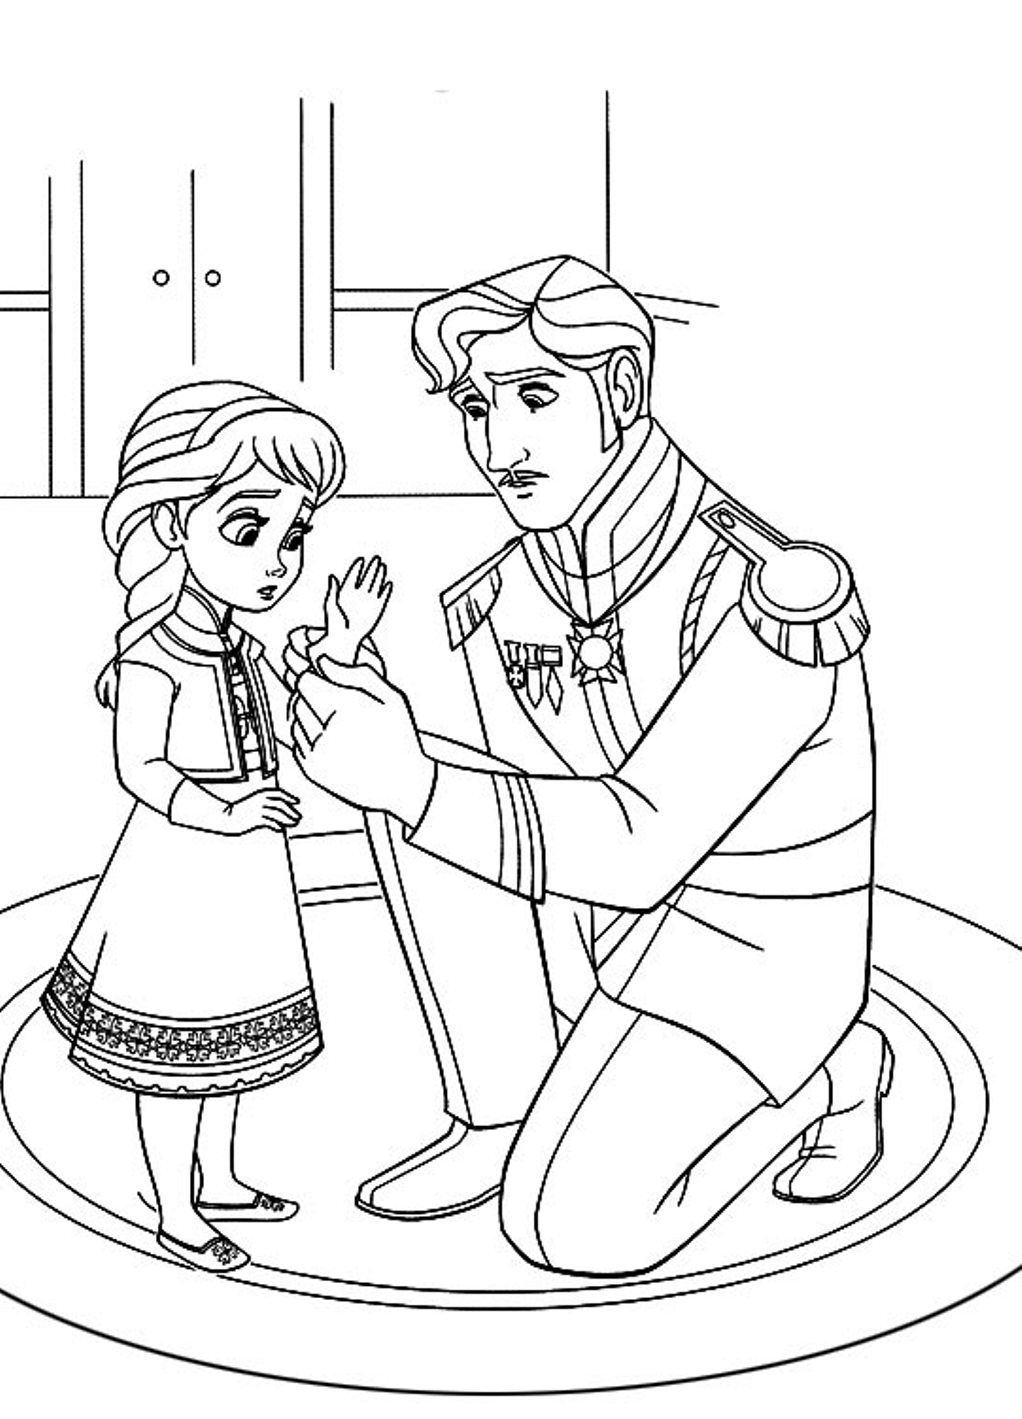 Frozen Coloring Pages Pdf - Coloring Home